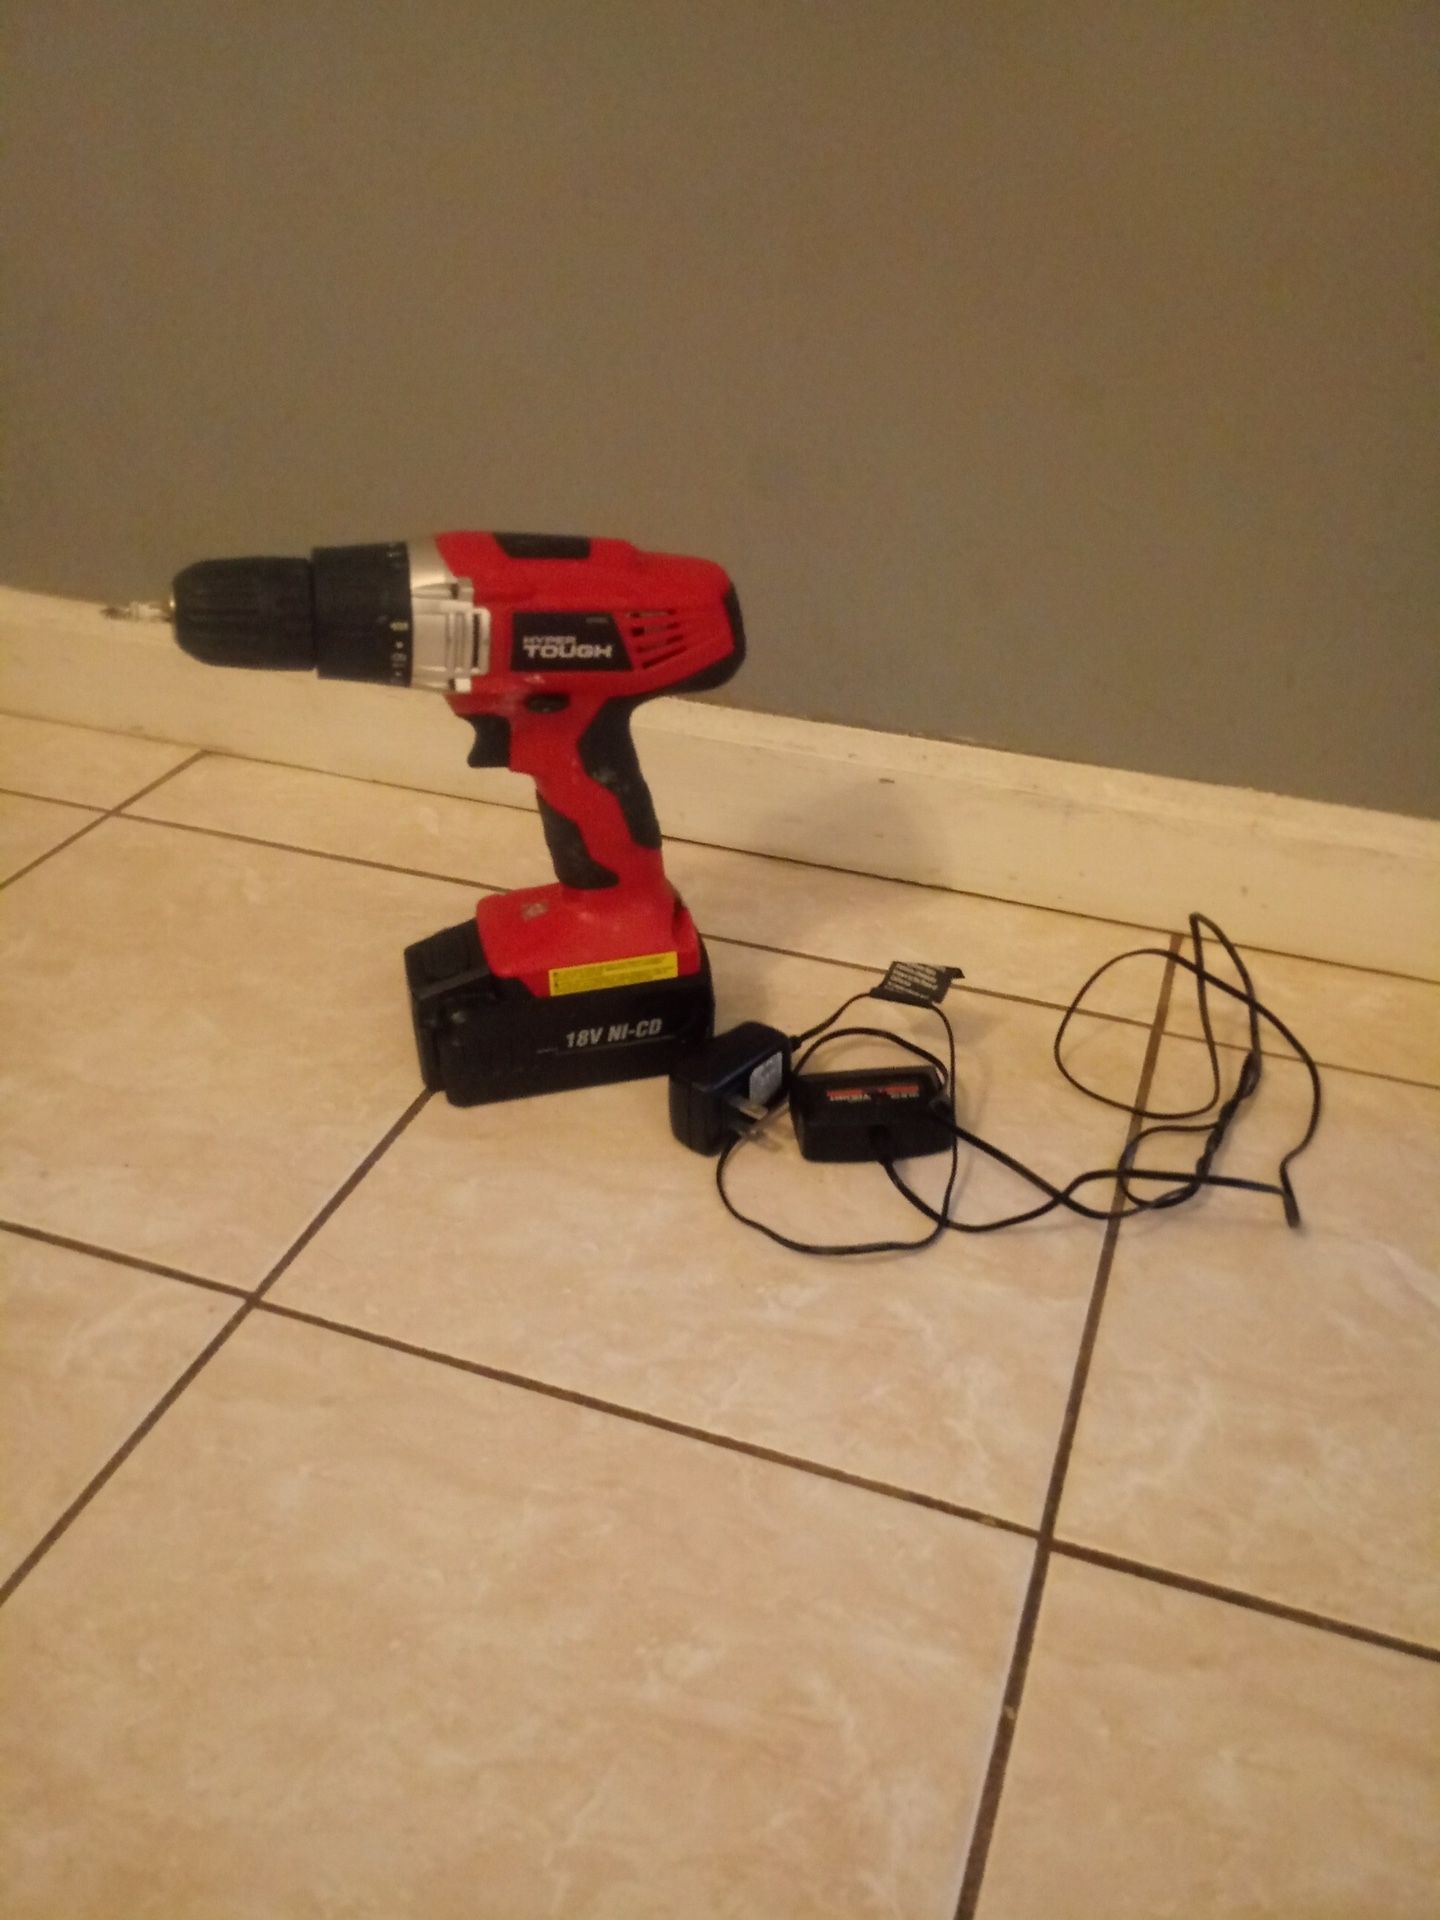 Battery operated drill